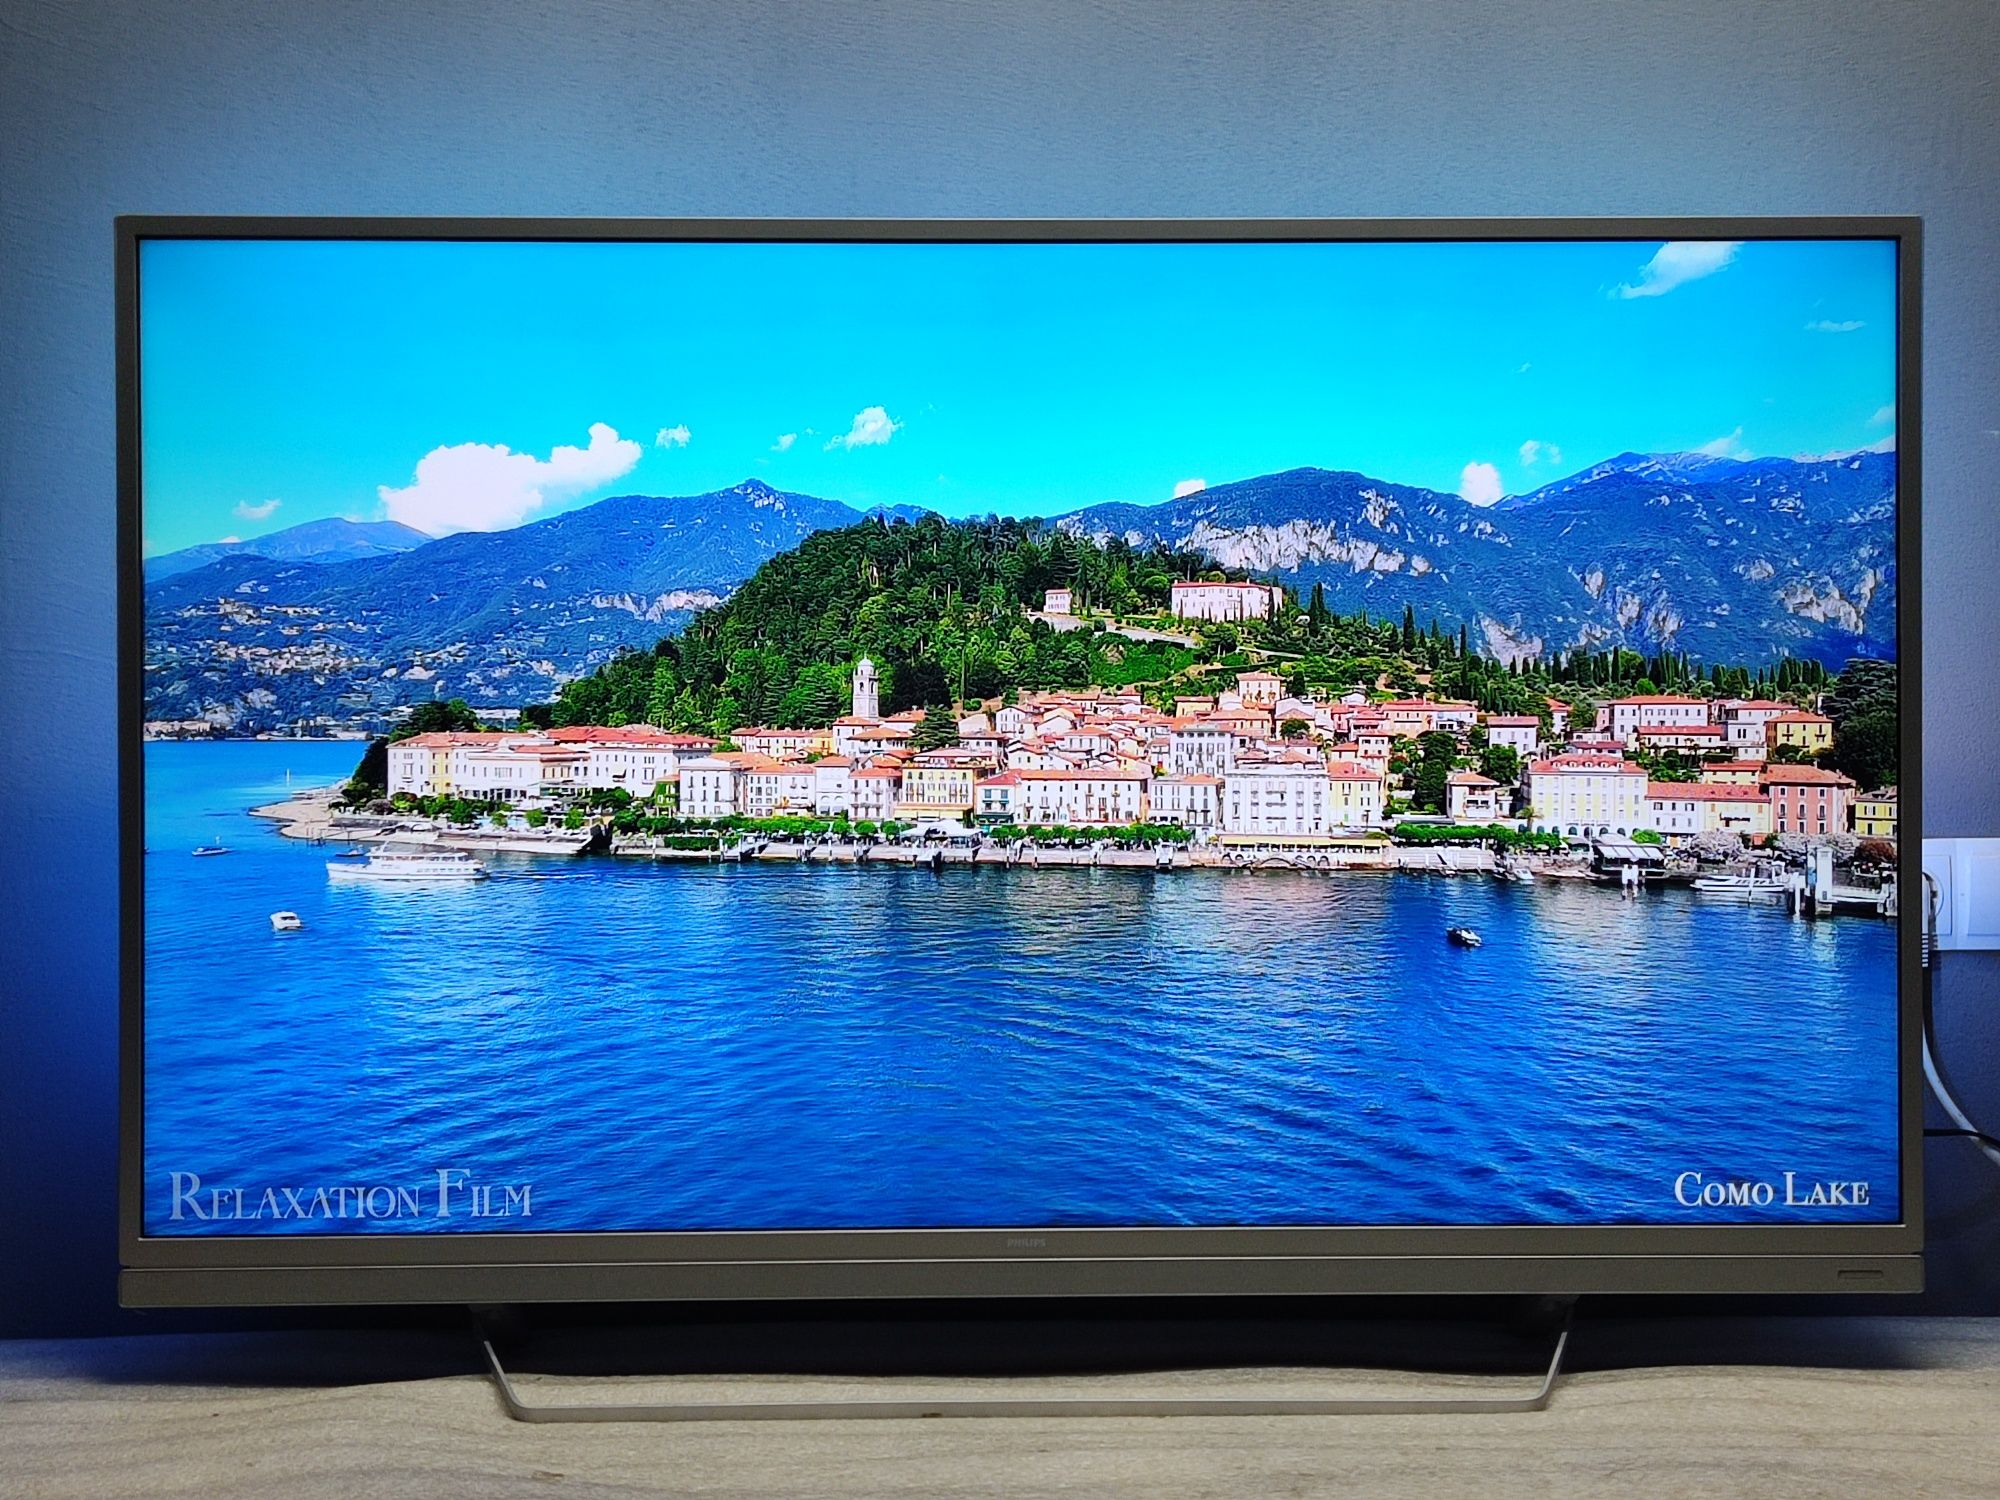 Philips 55PUS6482 UltraHD 4K Android 8 / 2017 / Ambilight XL !